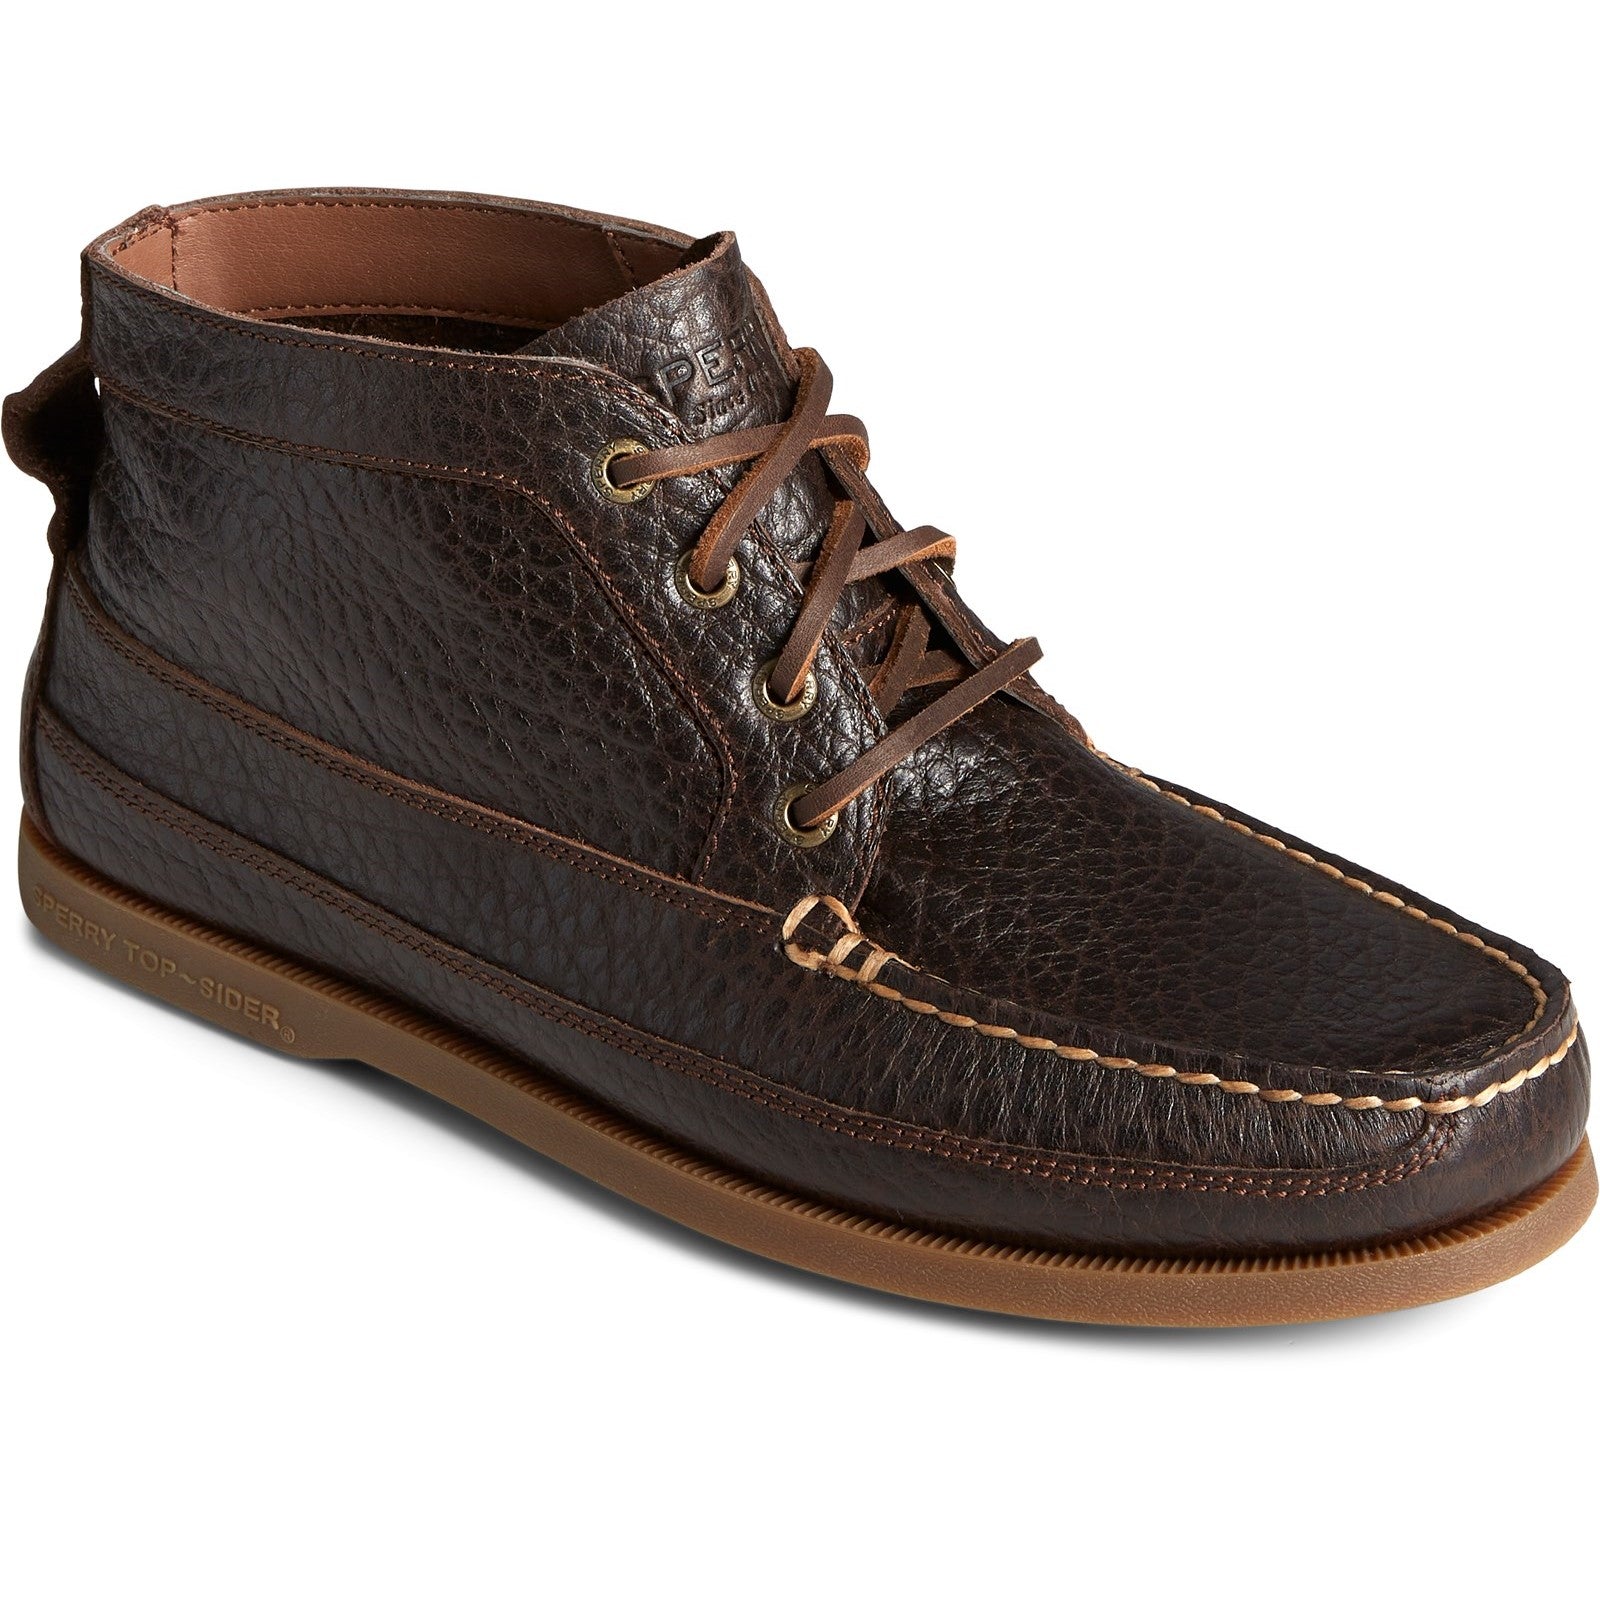 Sperry Mens Authentic Original Boat Chukka Tumbled Leather Boots - Dark Brown